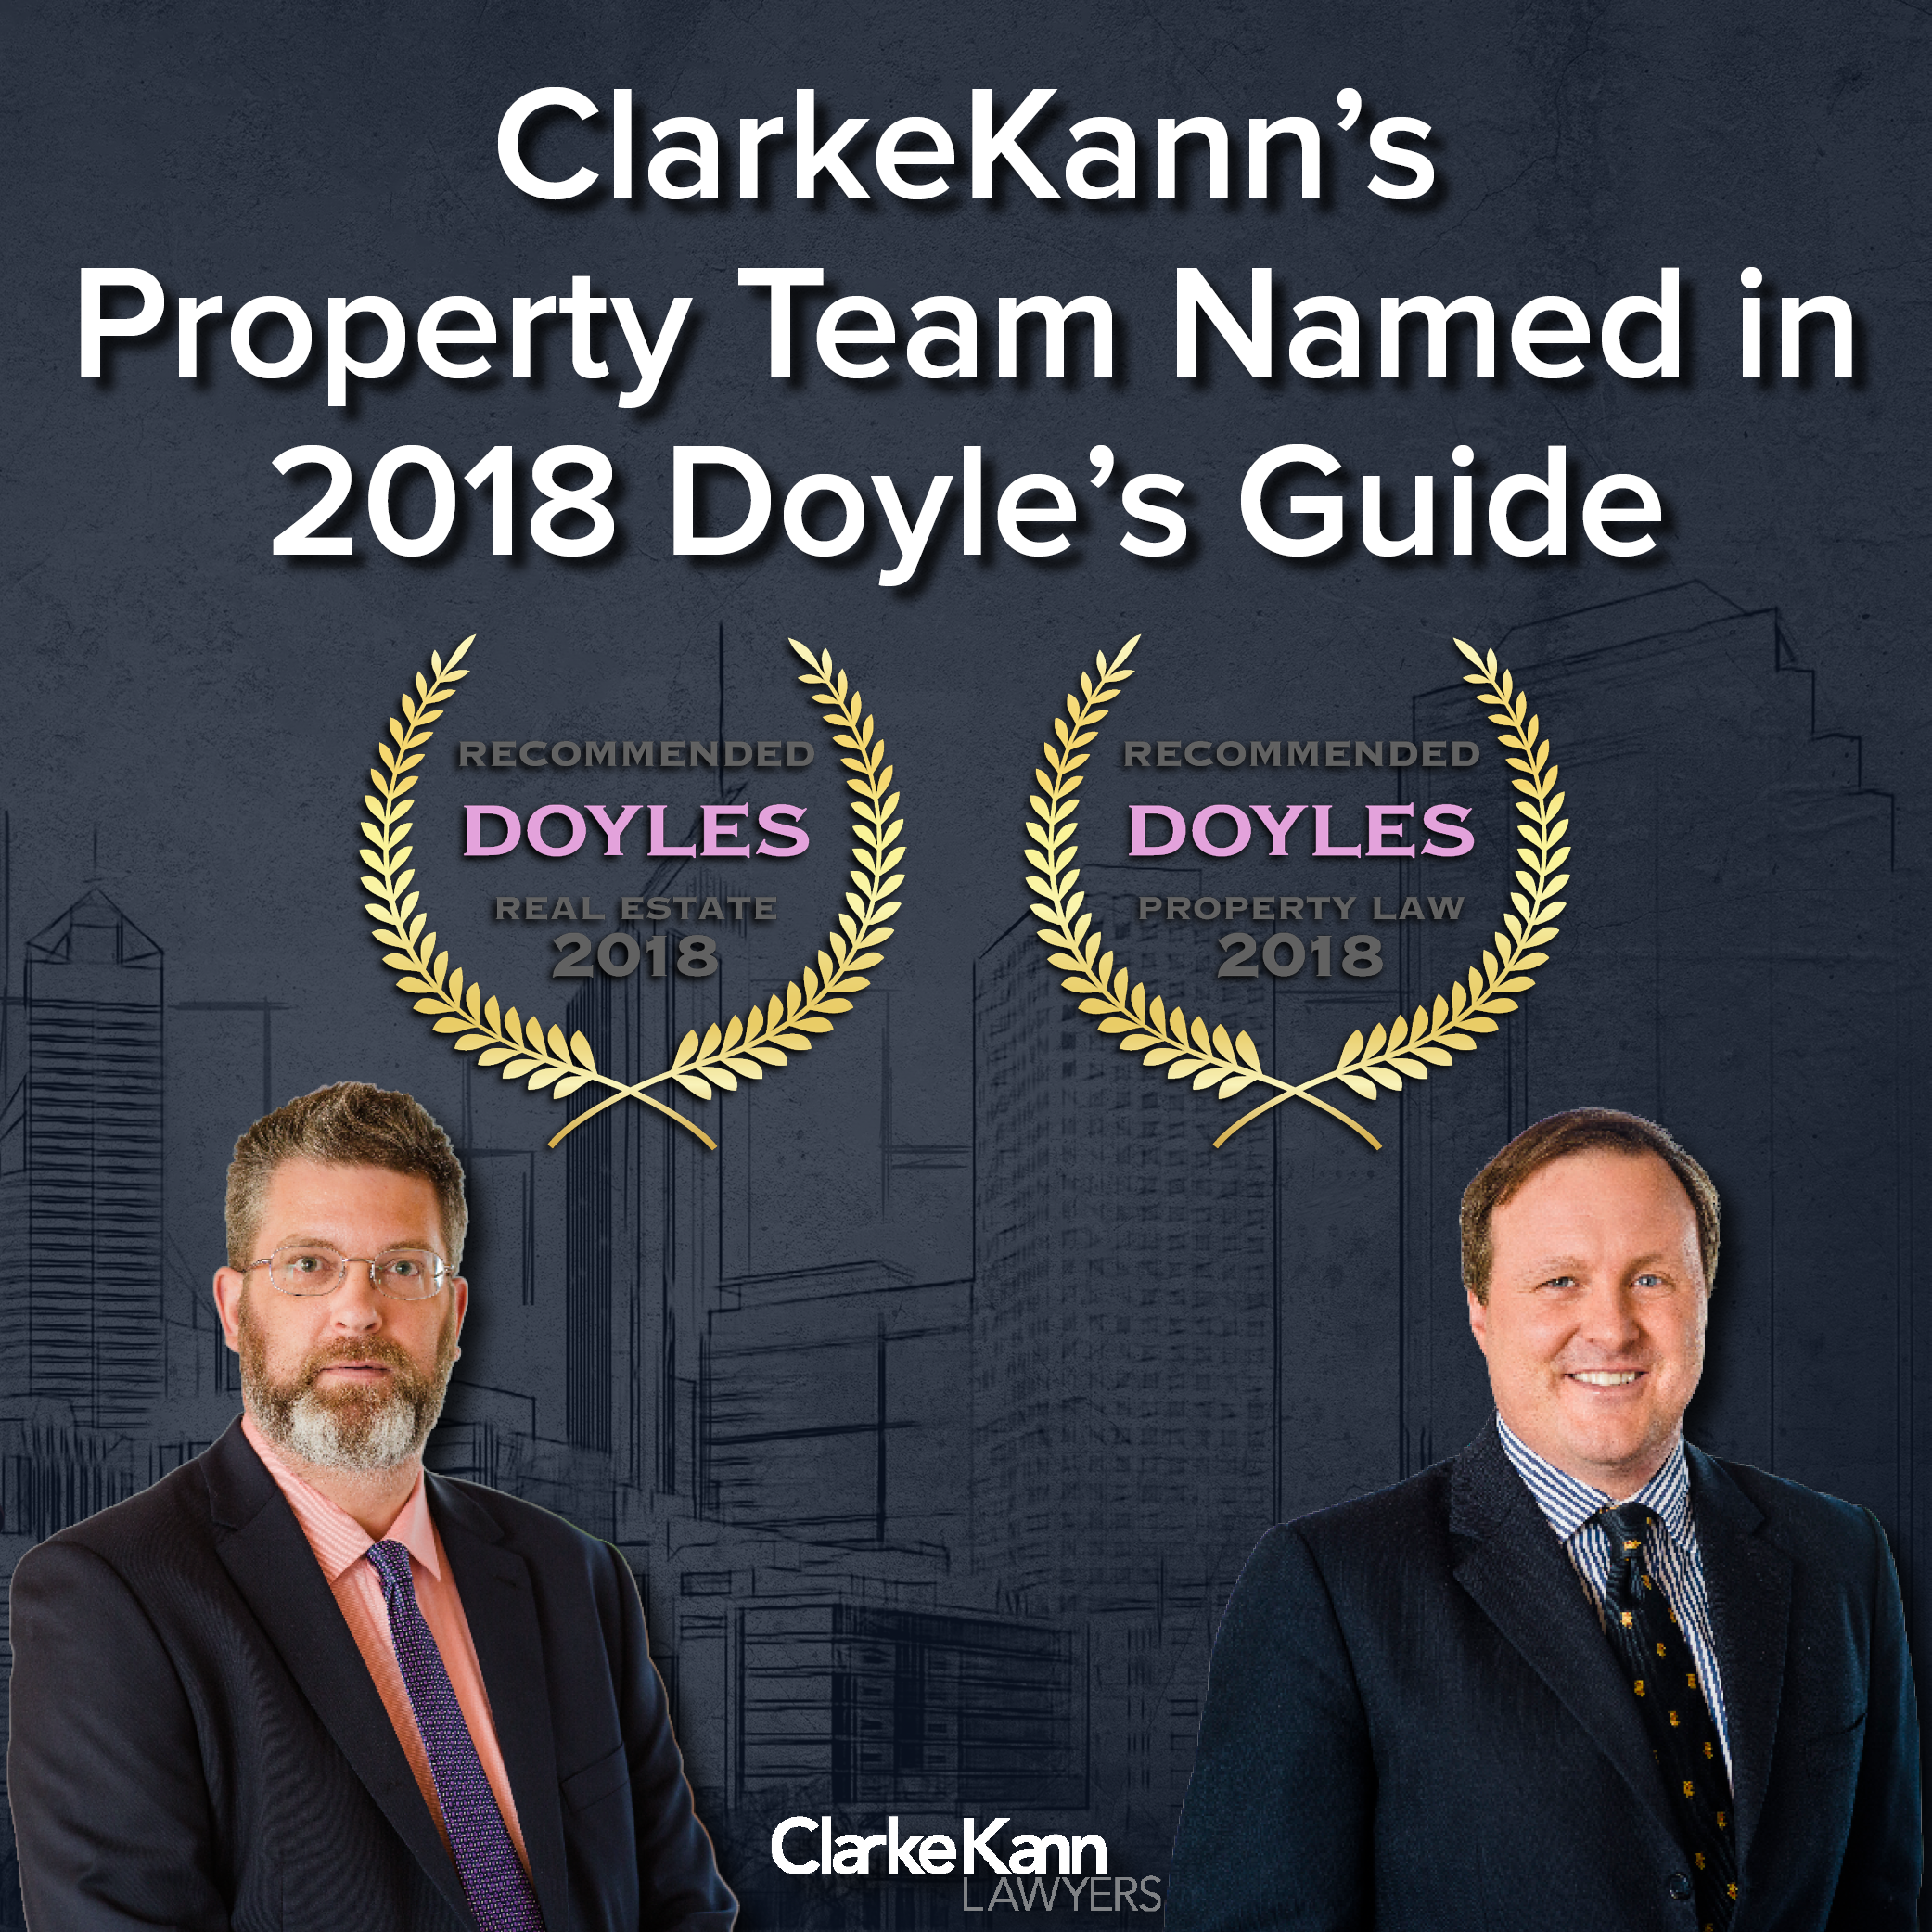 ANNOUNCEMENT: ClarkeKann’s Property Team Named in the 2018 Doyle’s Guide